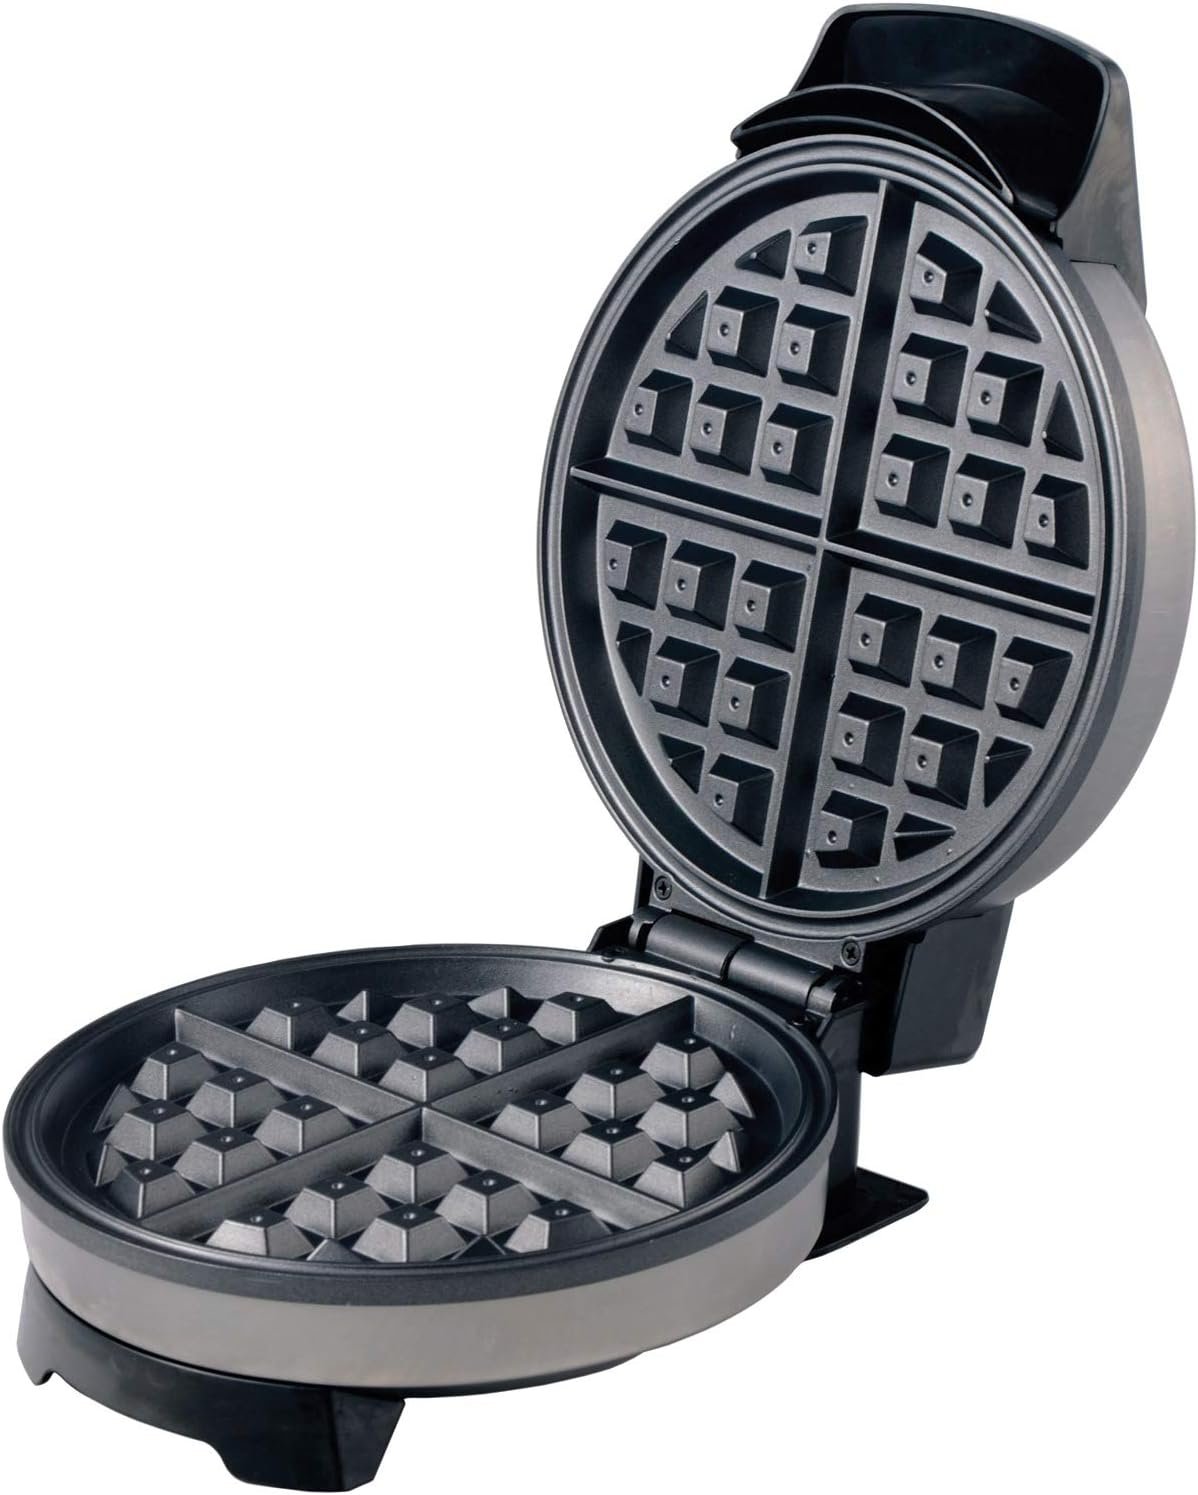 Brentwood Belgian Waffle Maker Non-Stick, 7, Stainless Steel